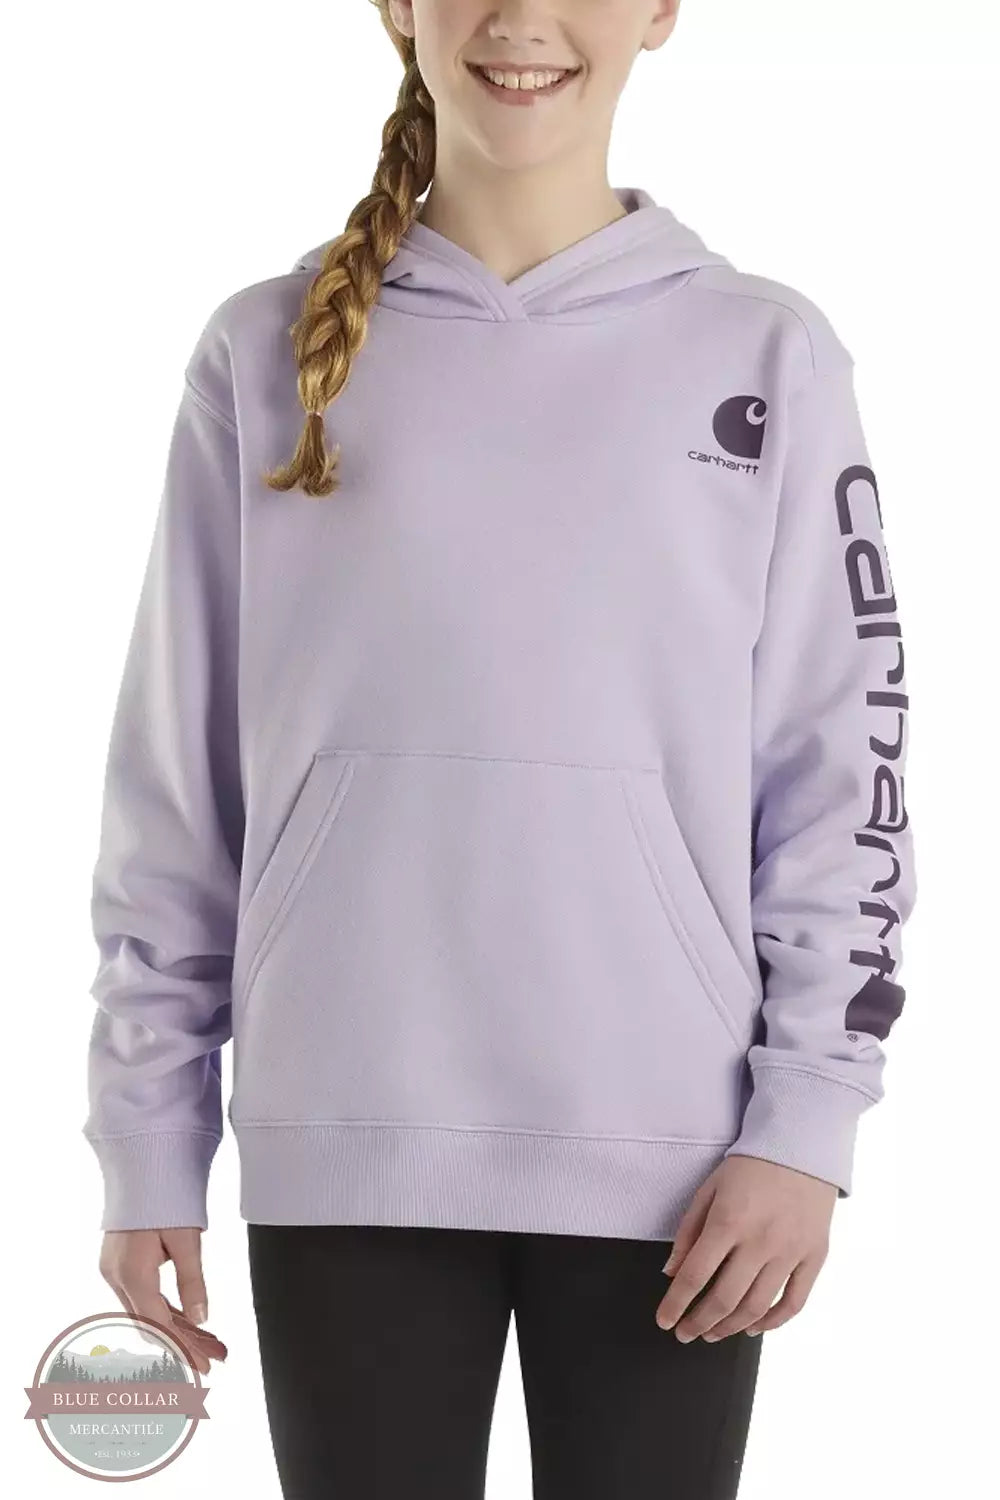 Carhartt CA9983-L193 Youth Long Sleeve Logo Graphic Hoodie in Lavender Front View